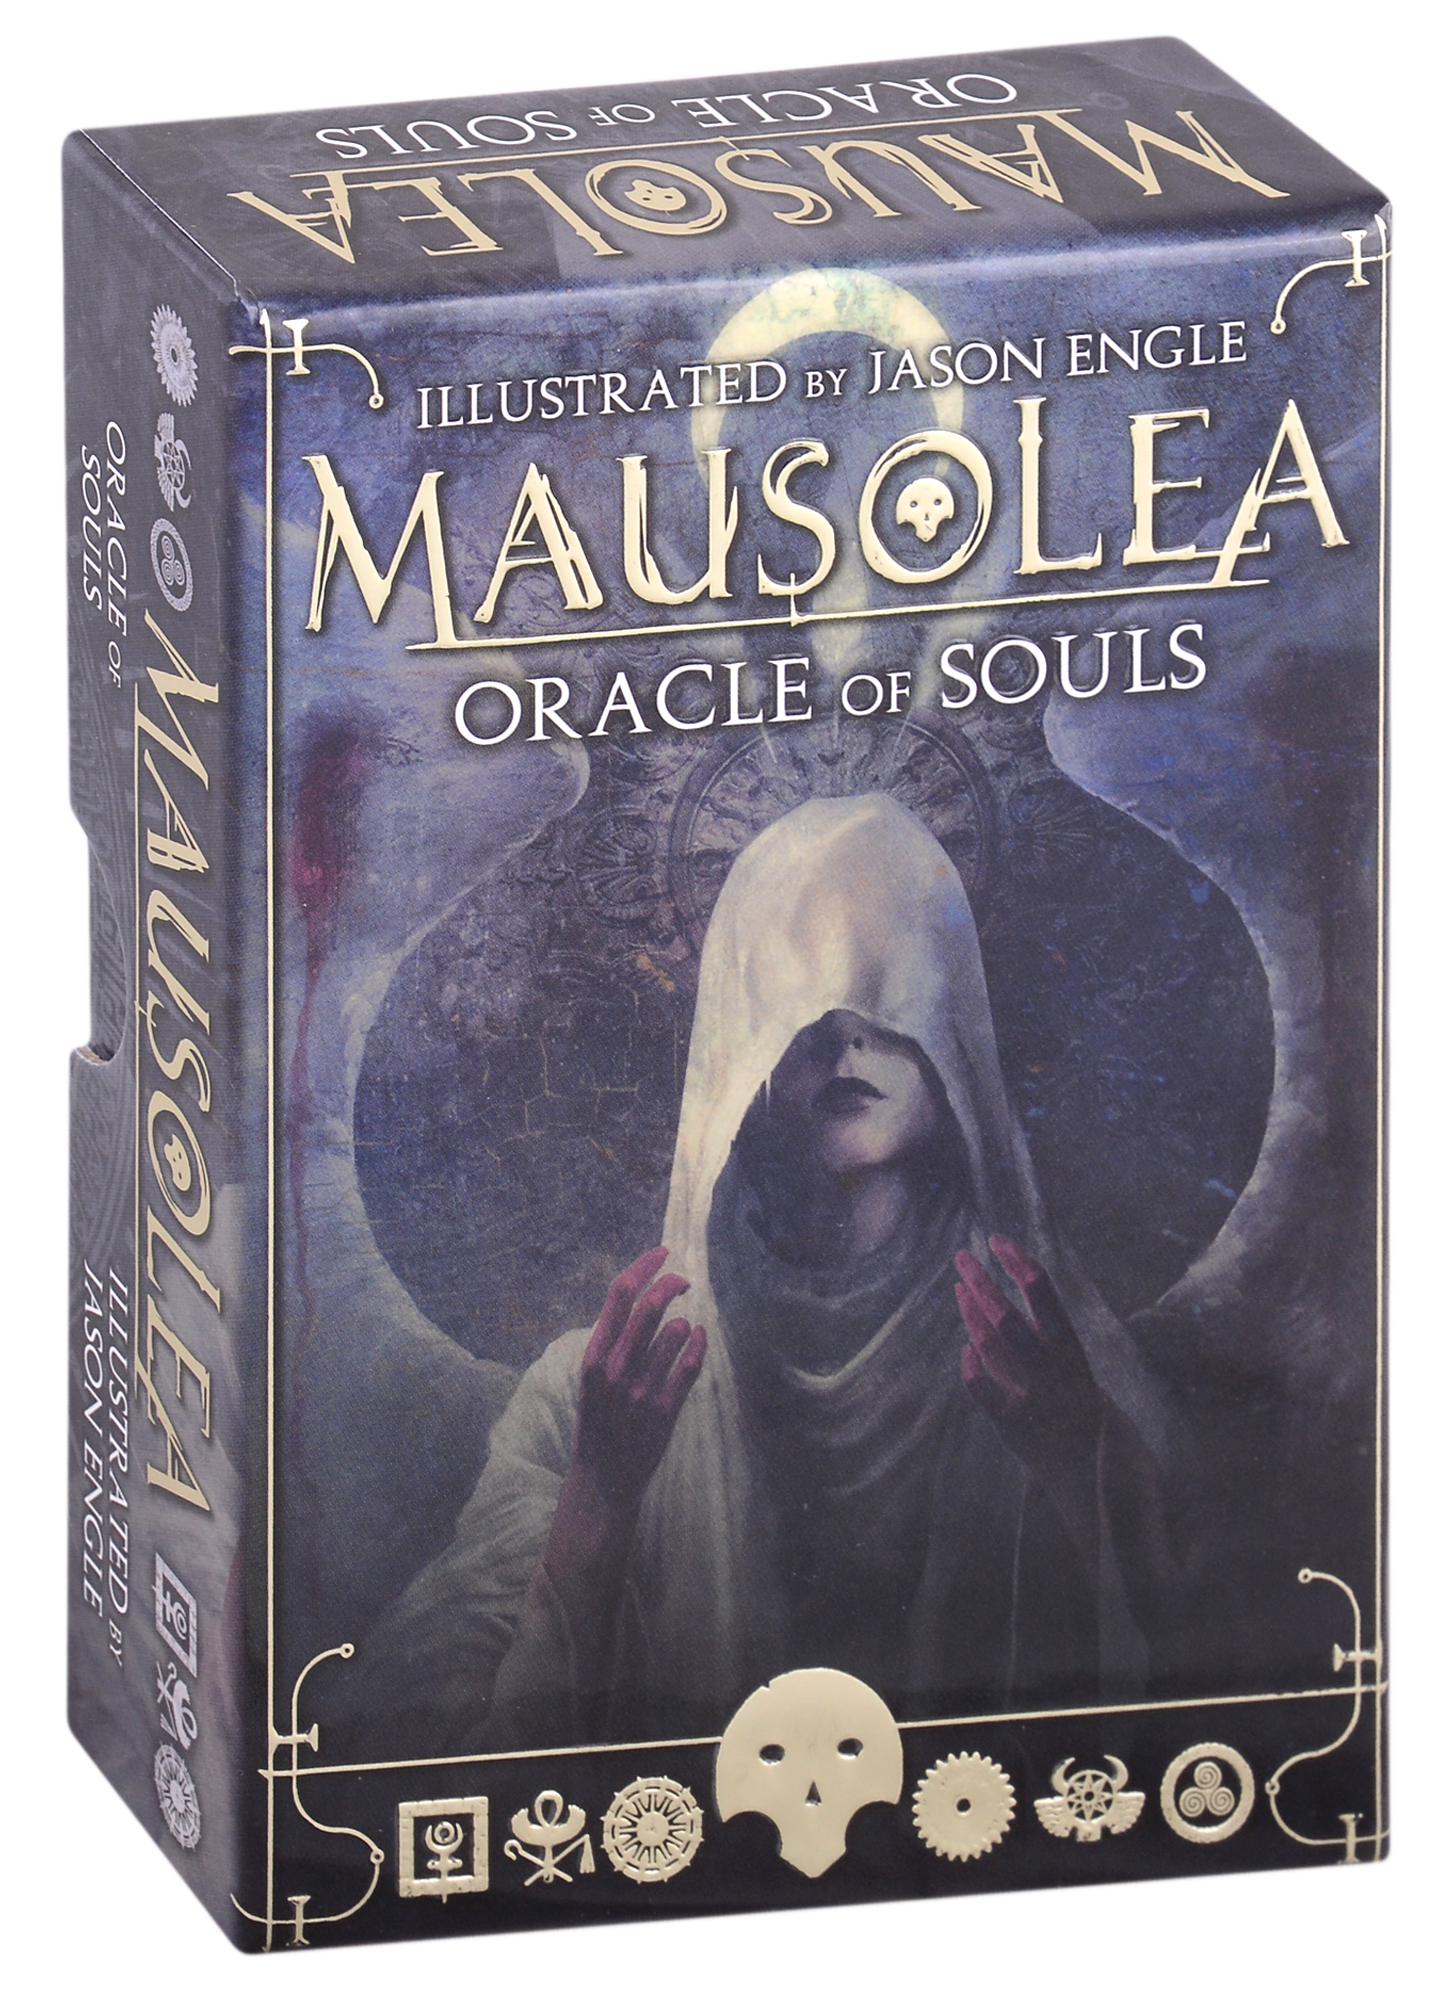 None Mausolea. Oracle of Souls (Book & 36 Oracle Cards)